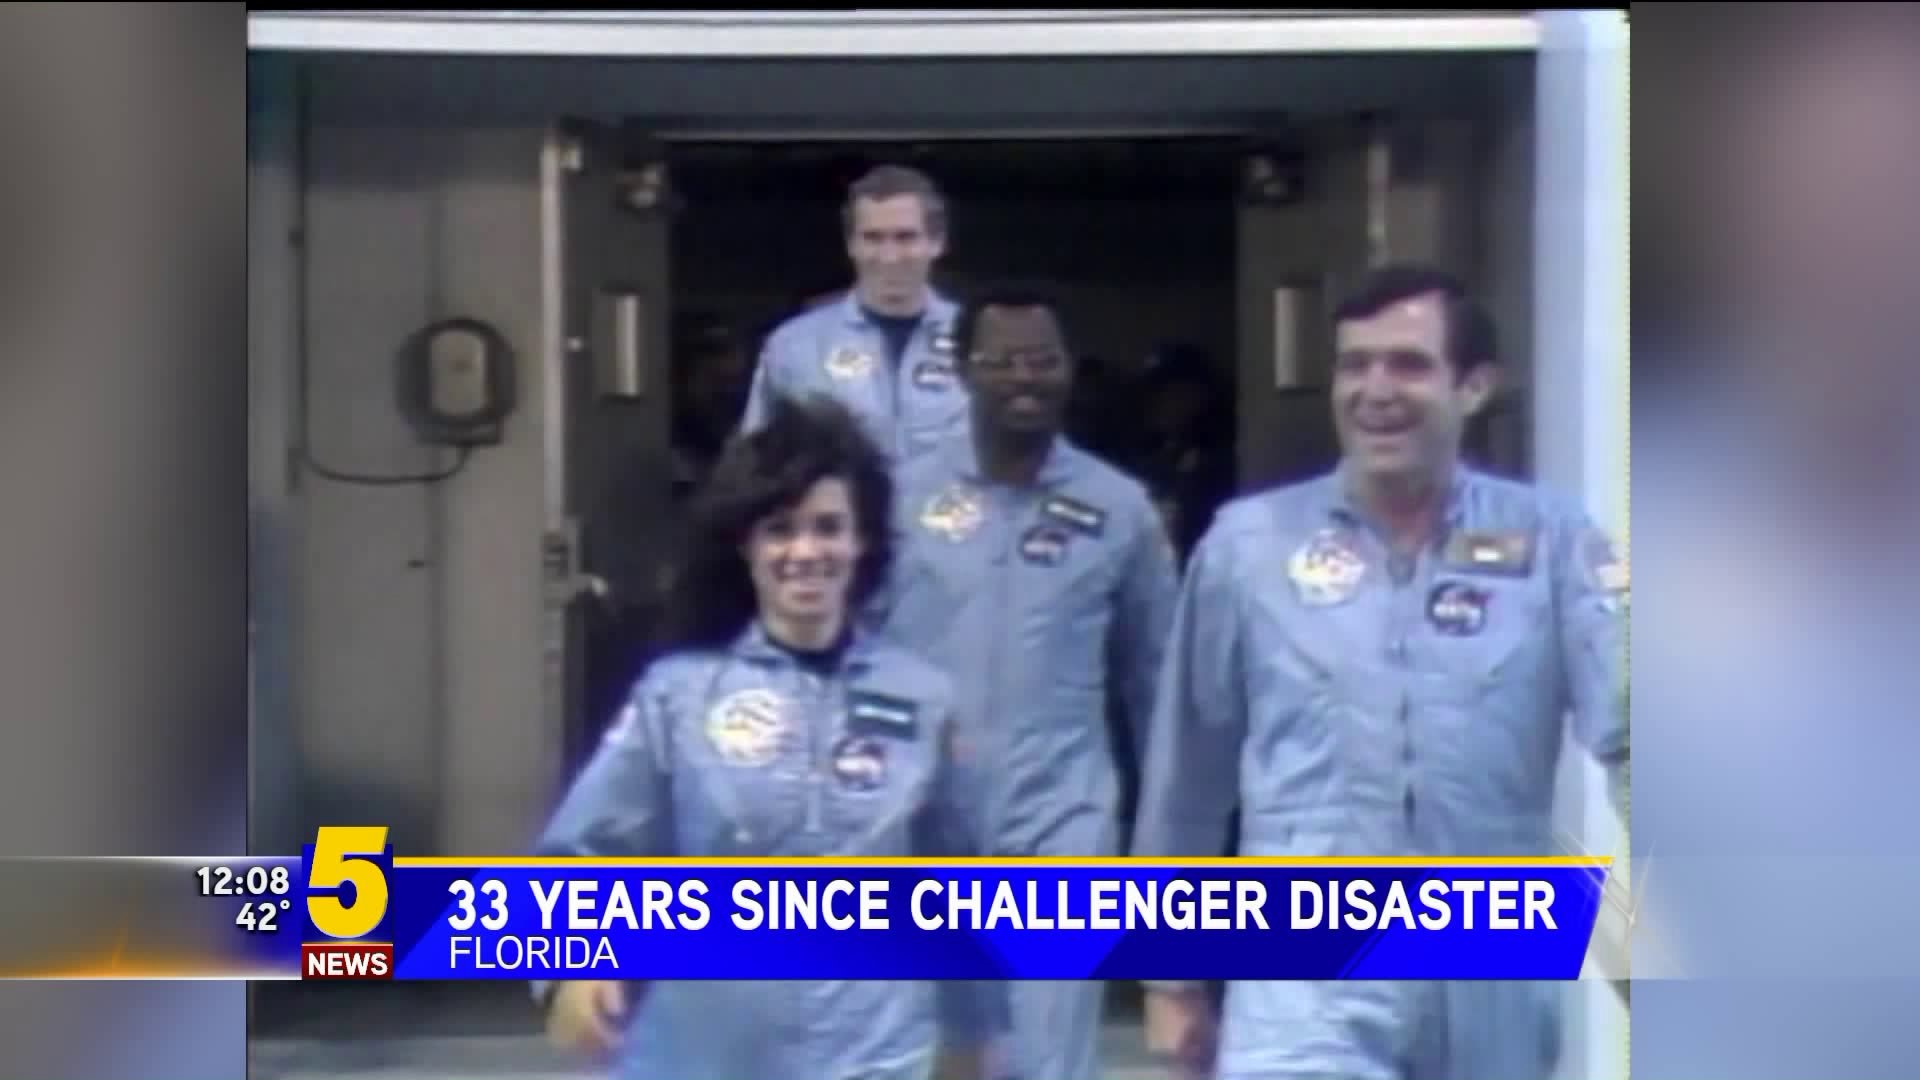 33 Years Since Challenger Disaster